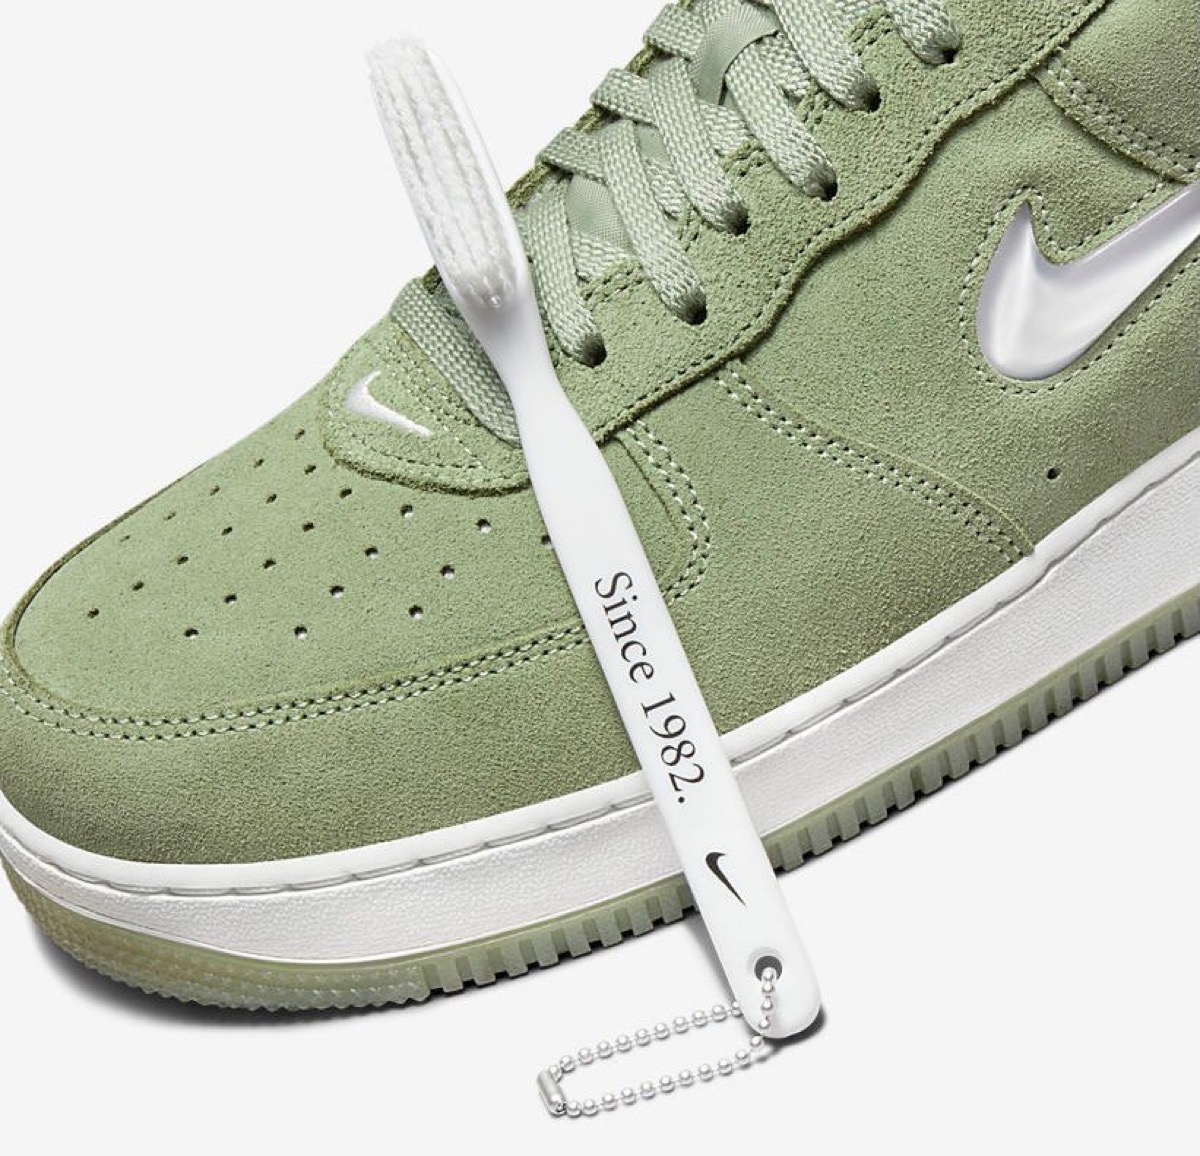 Nike Air Force 1 Low Retro Color of the Month “Oil Green Jewel”が